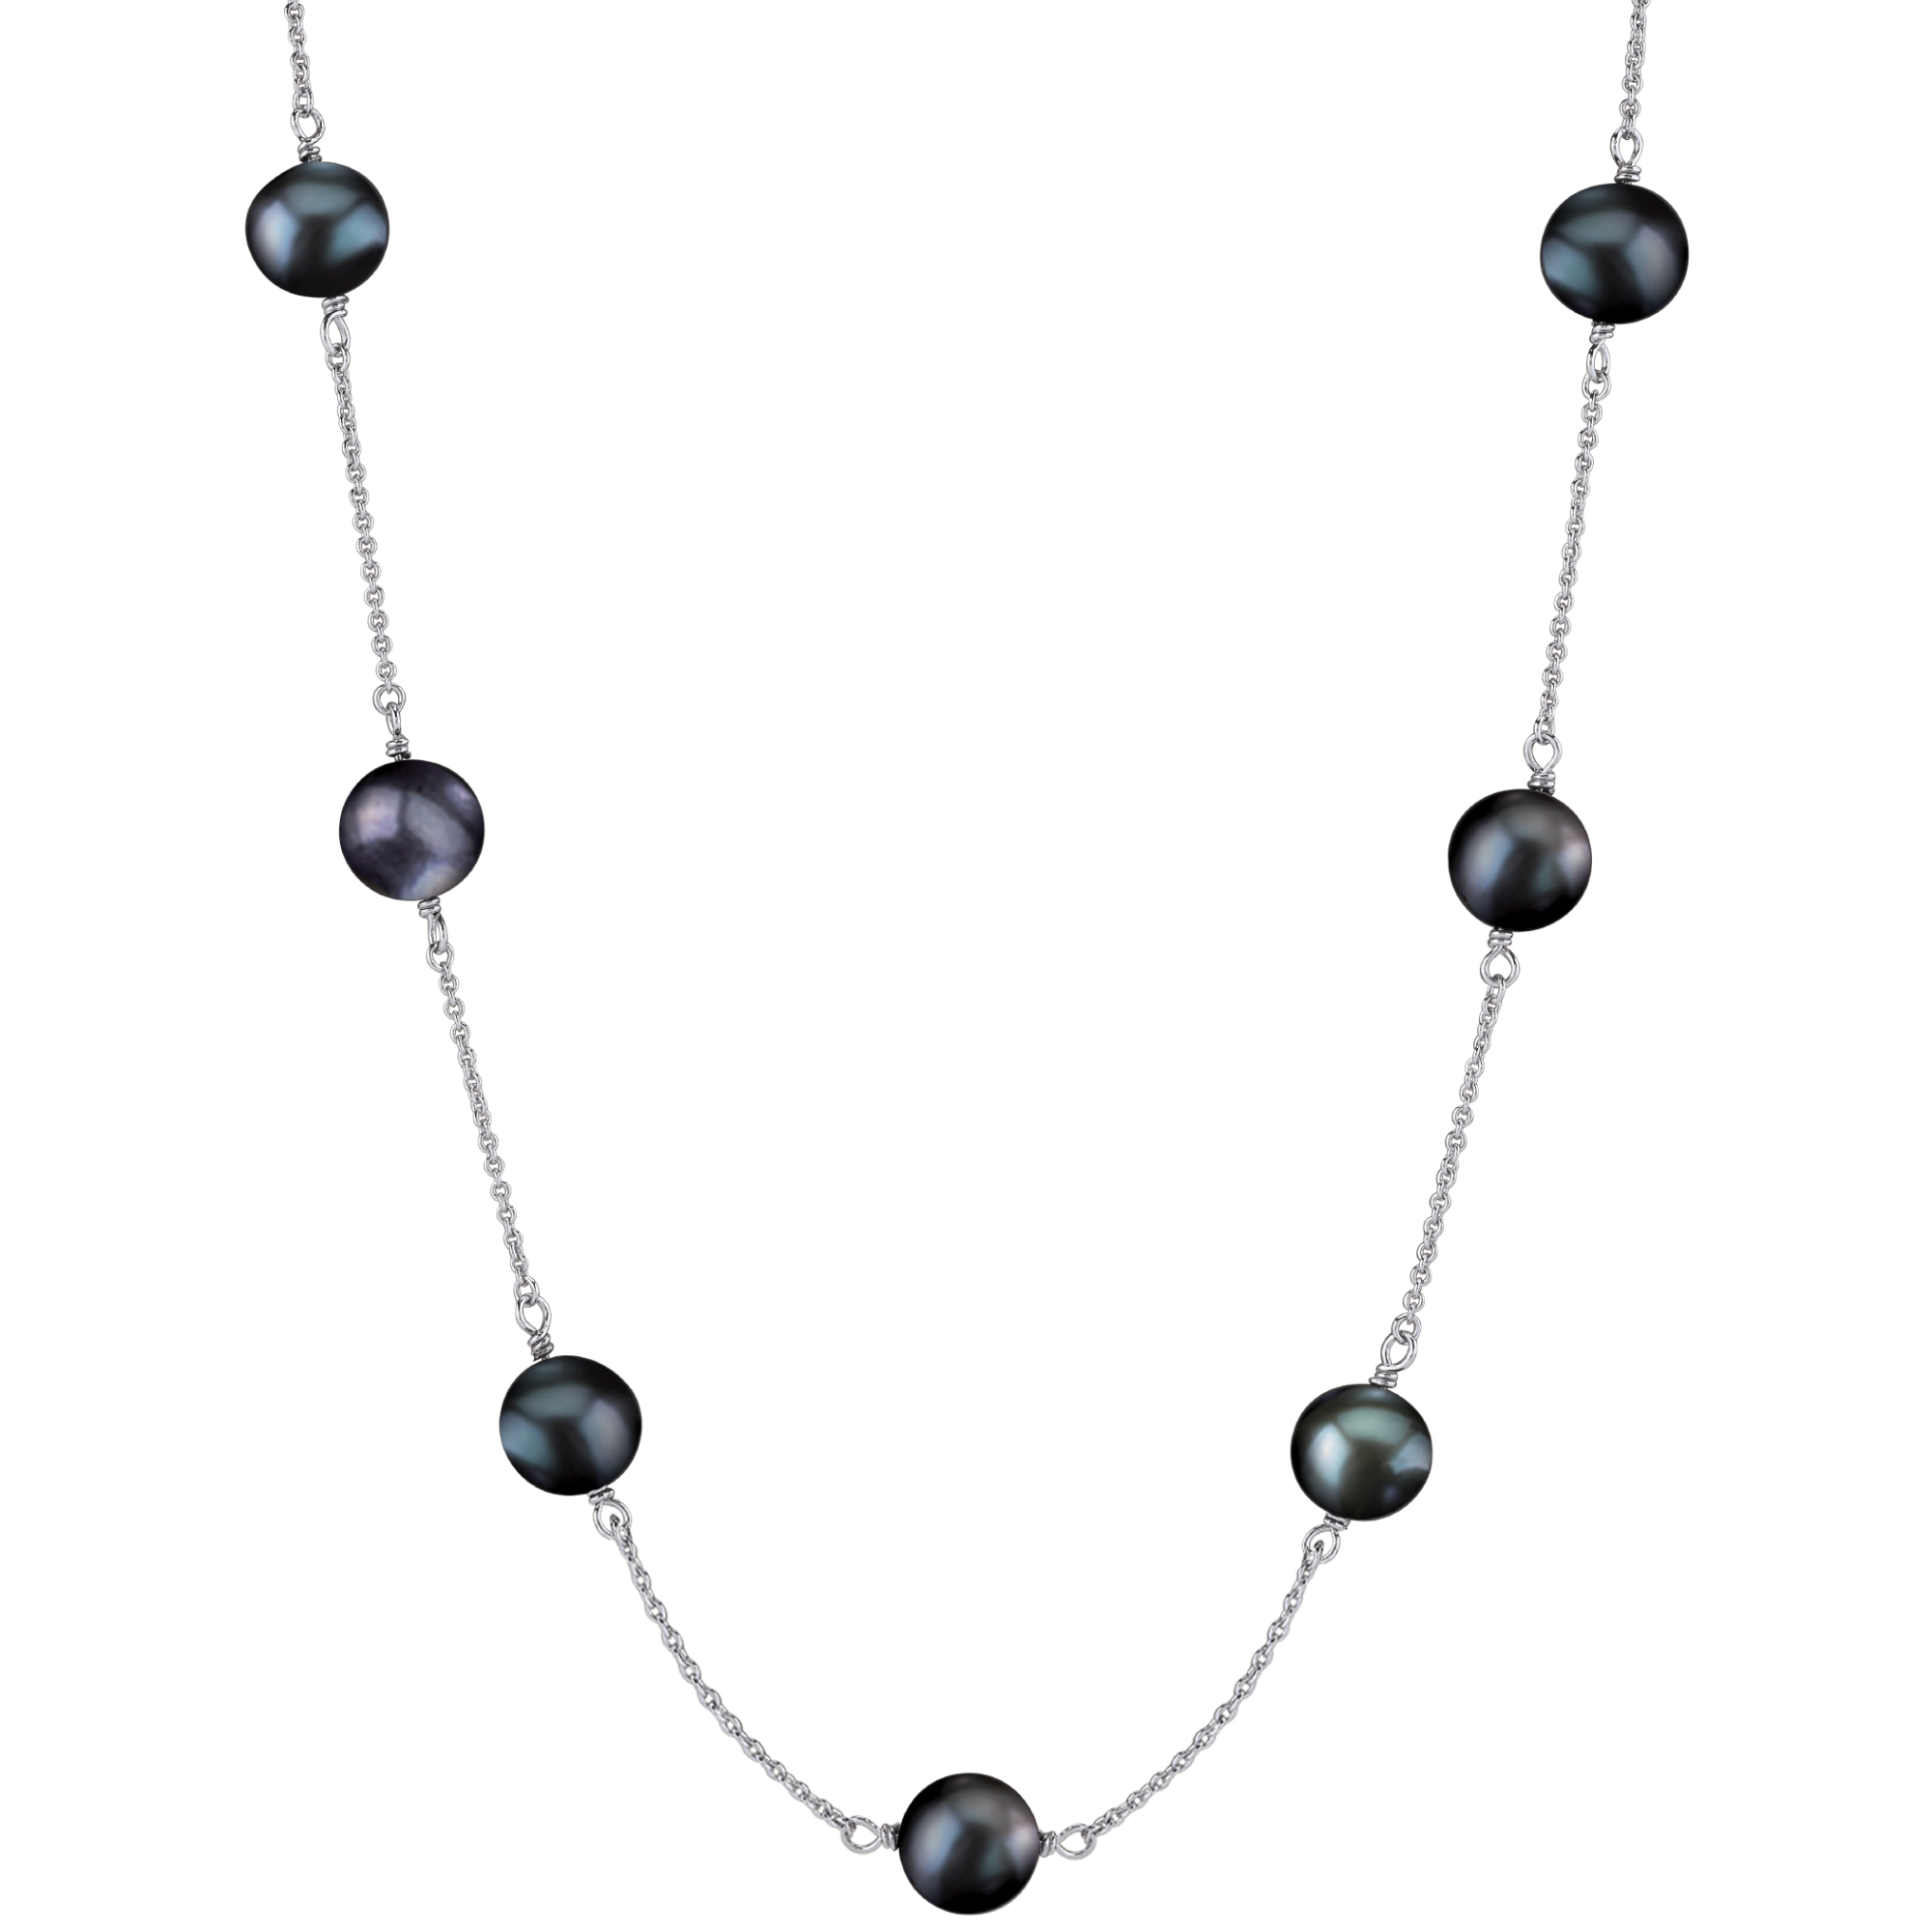 Fashionable Black Pearl Necklace